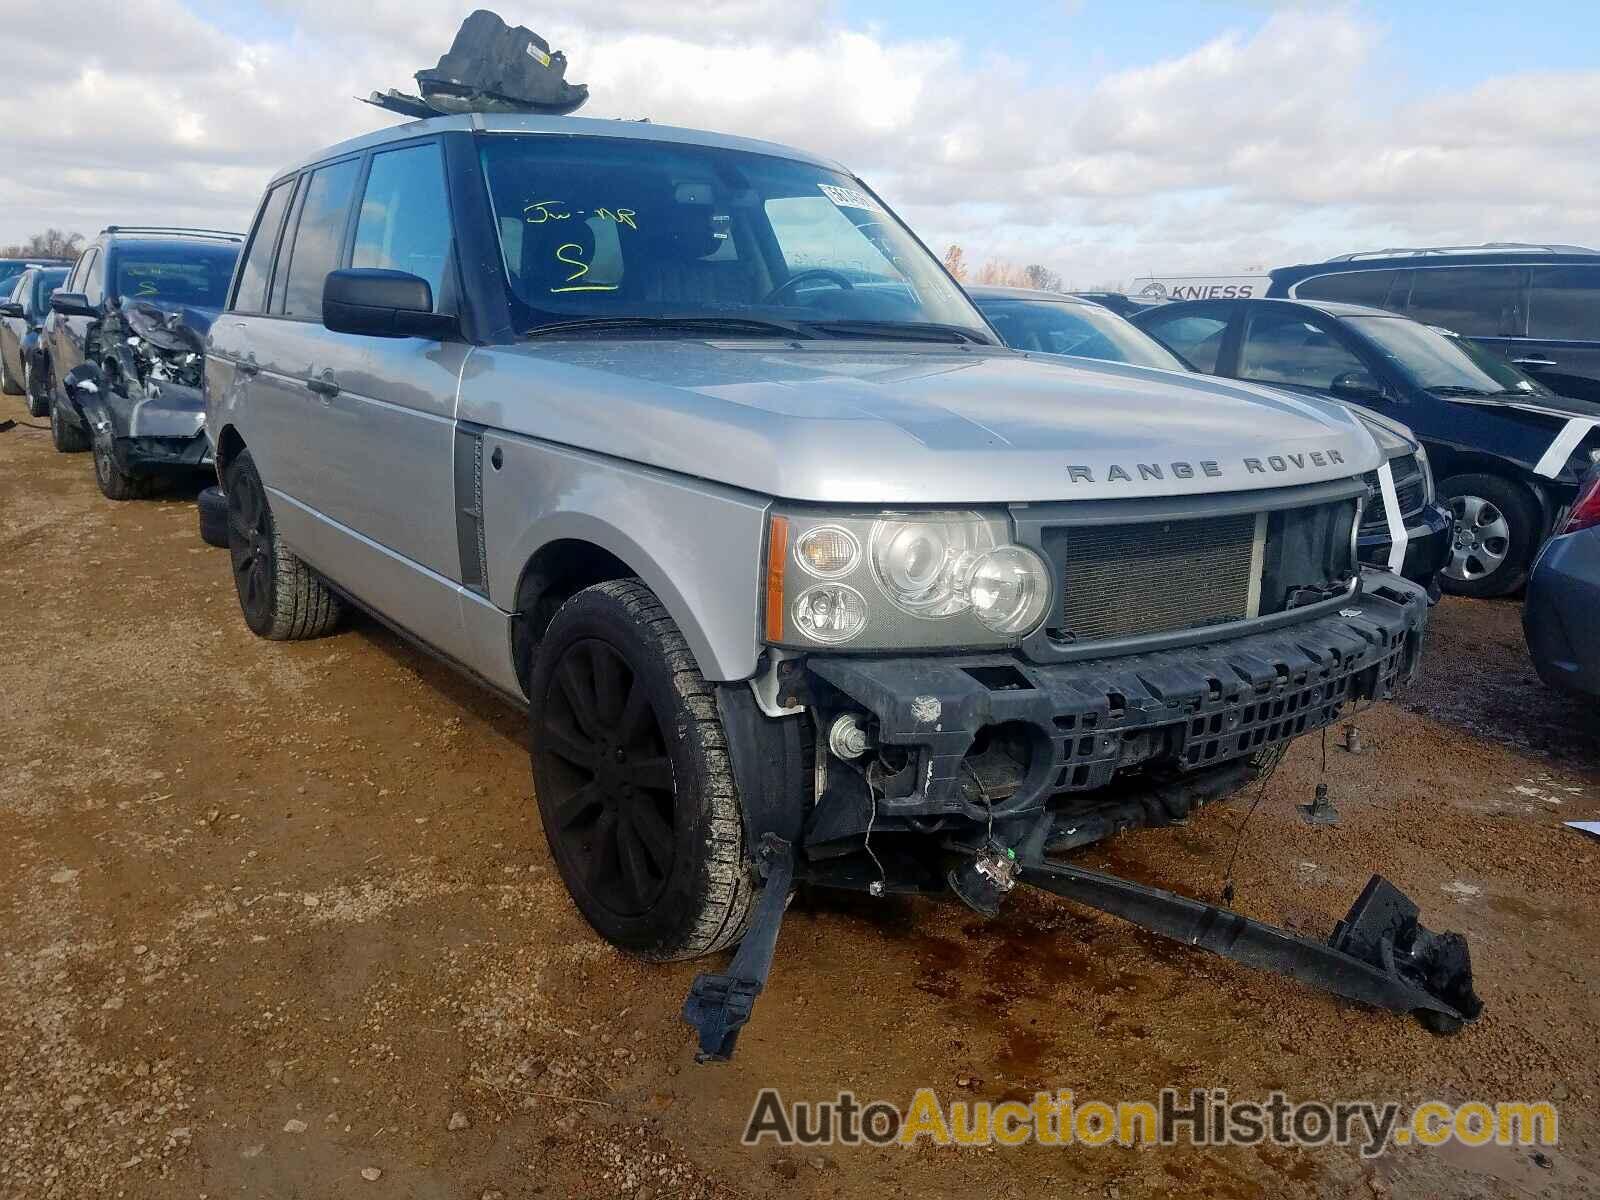 2006 LAND ROVER RANGE ROVE SUPERCHARGED, SALMF13416A198071